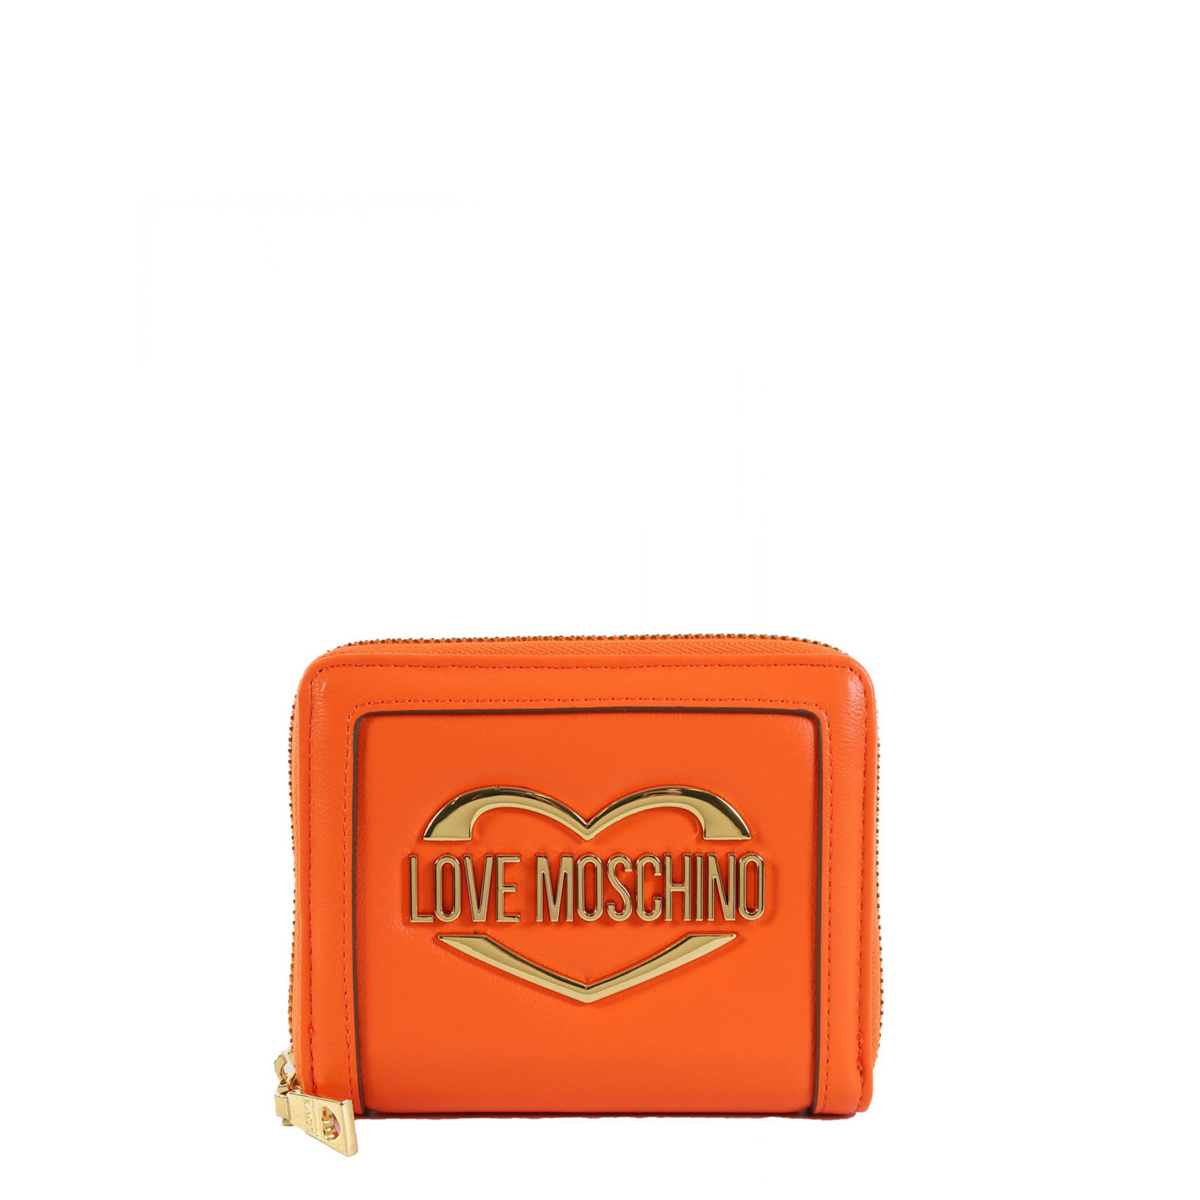 Love Moschino - Portefeuille femme